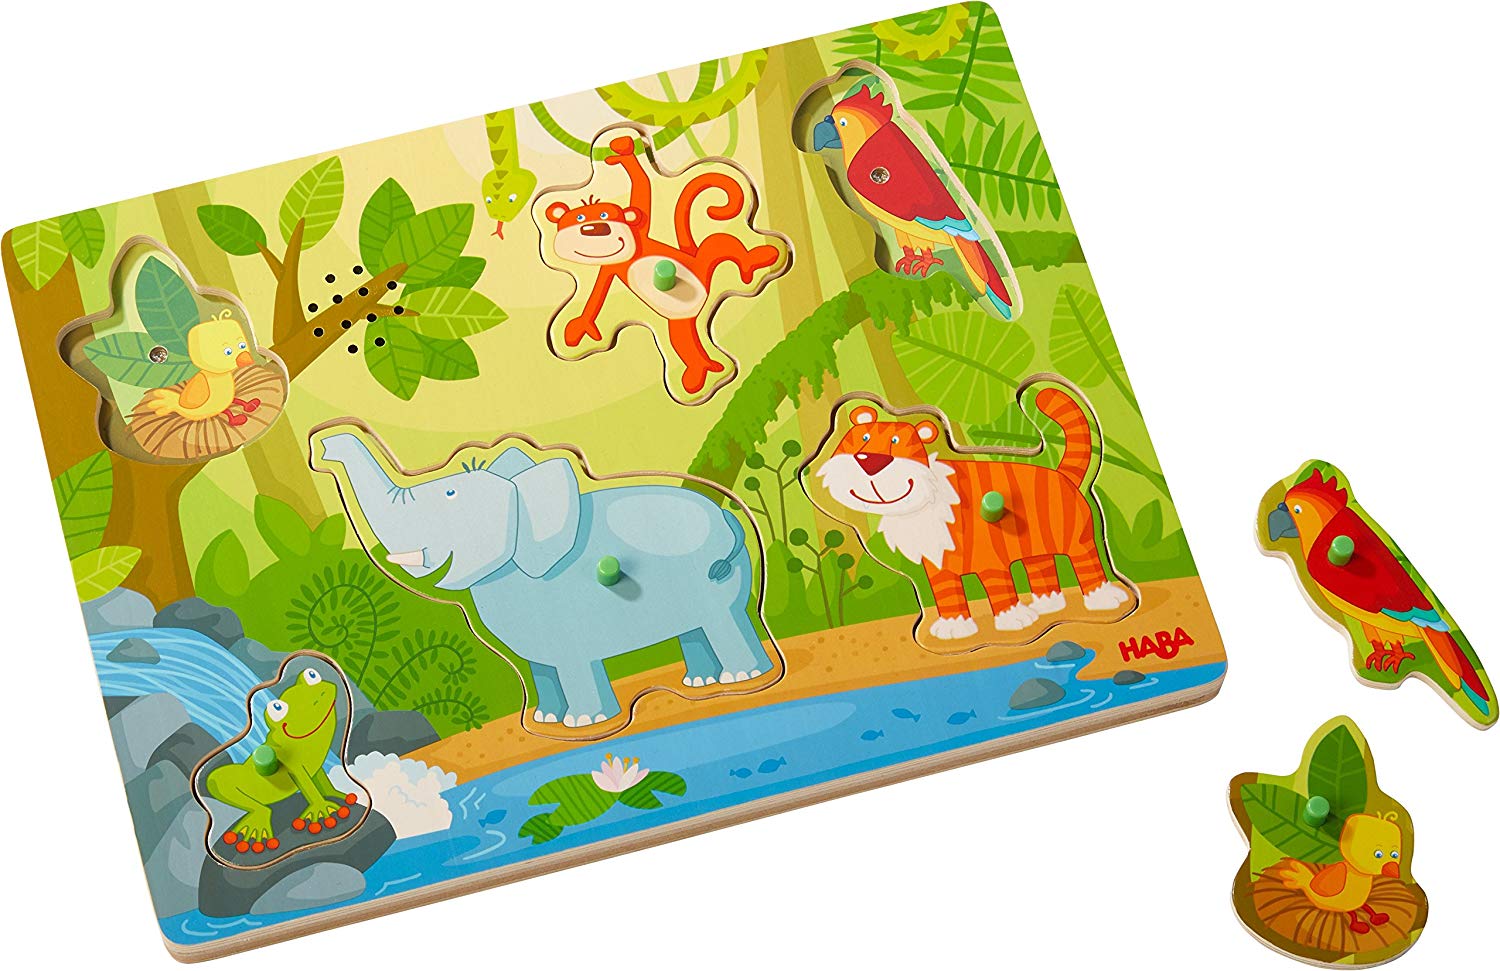 Haba 303181 Sound Puzzle In The Jungle Child Aged 2 And Above With Sweet An